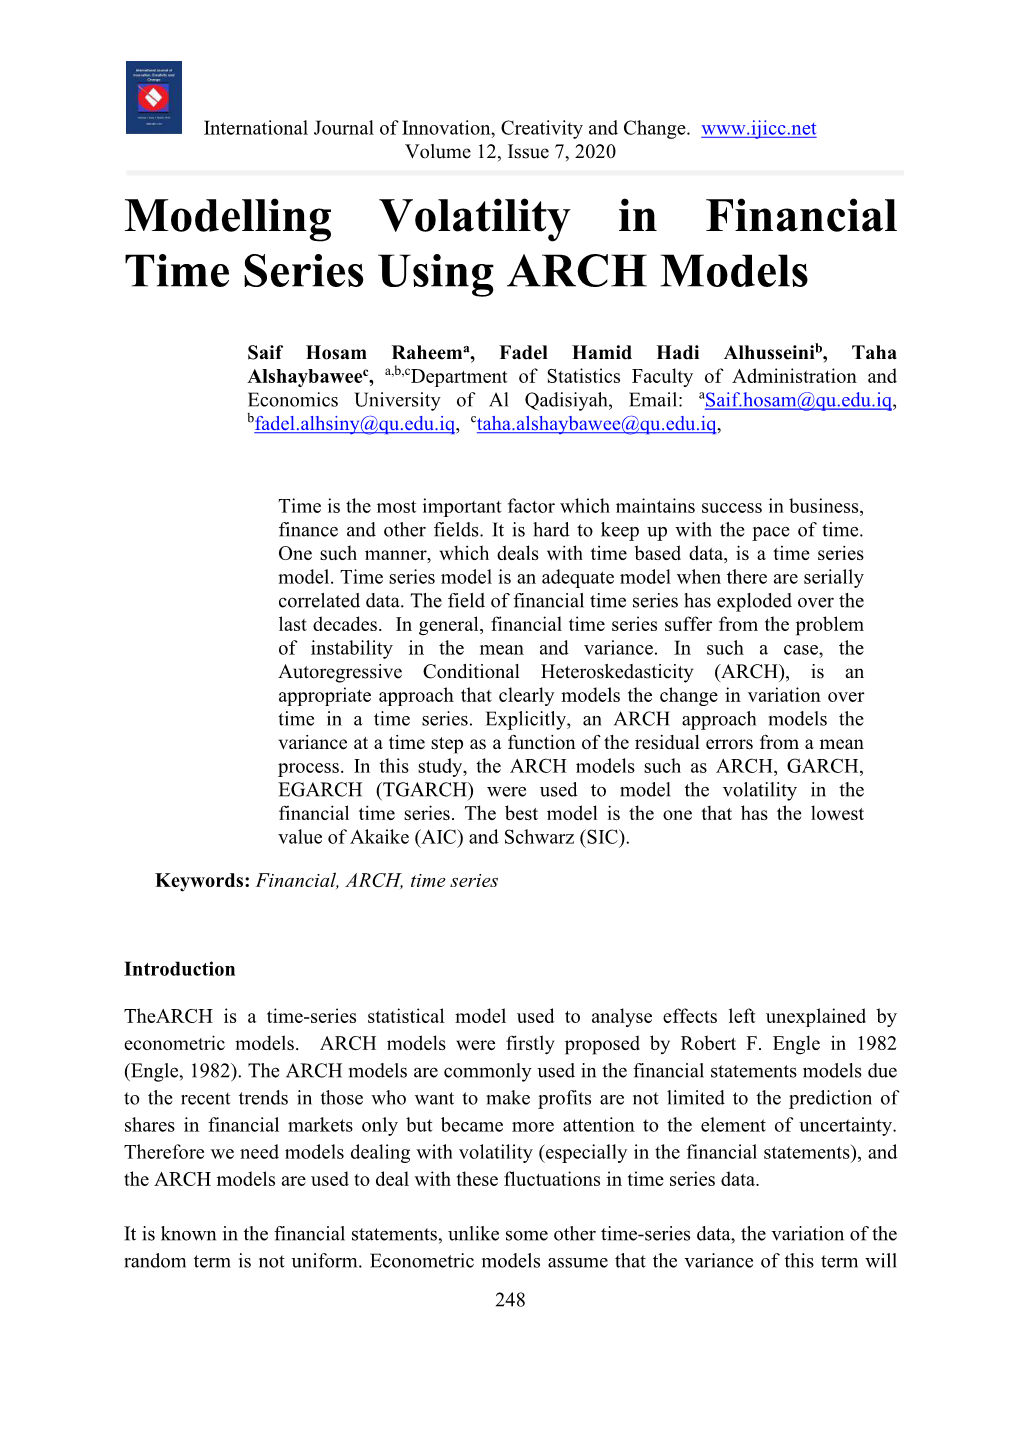 Modelling Volatility in Financial Time Series Using ARCH Models